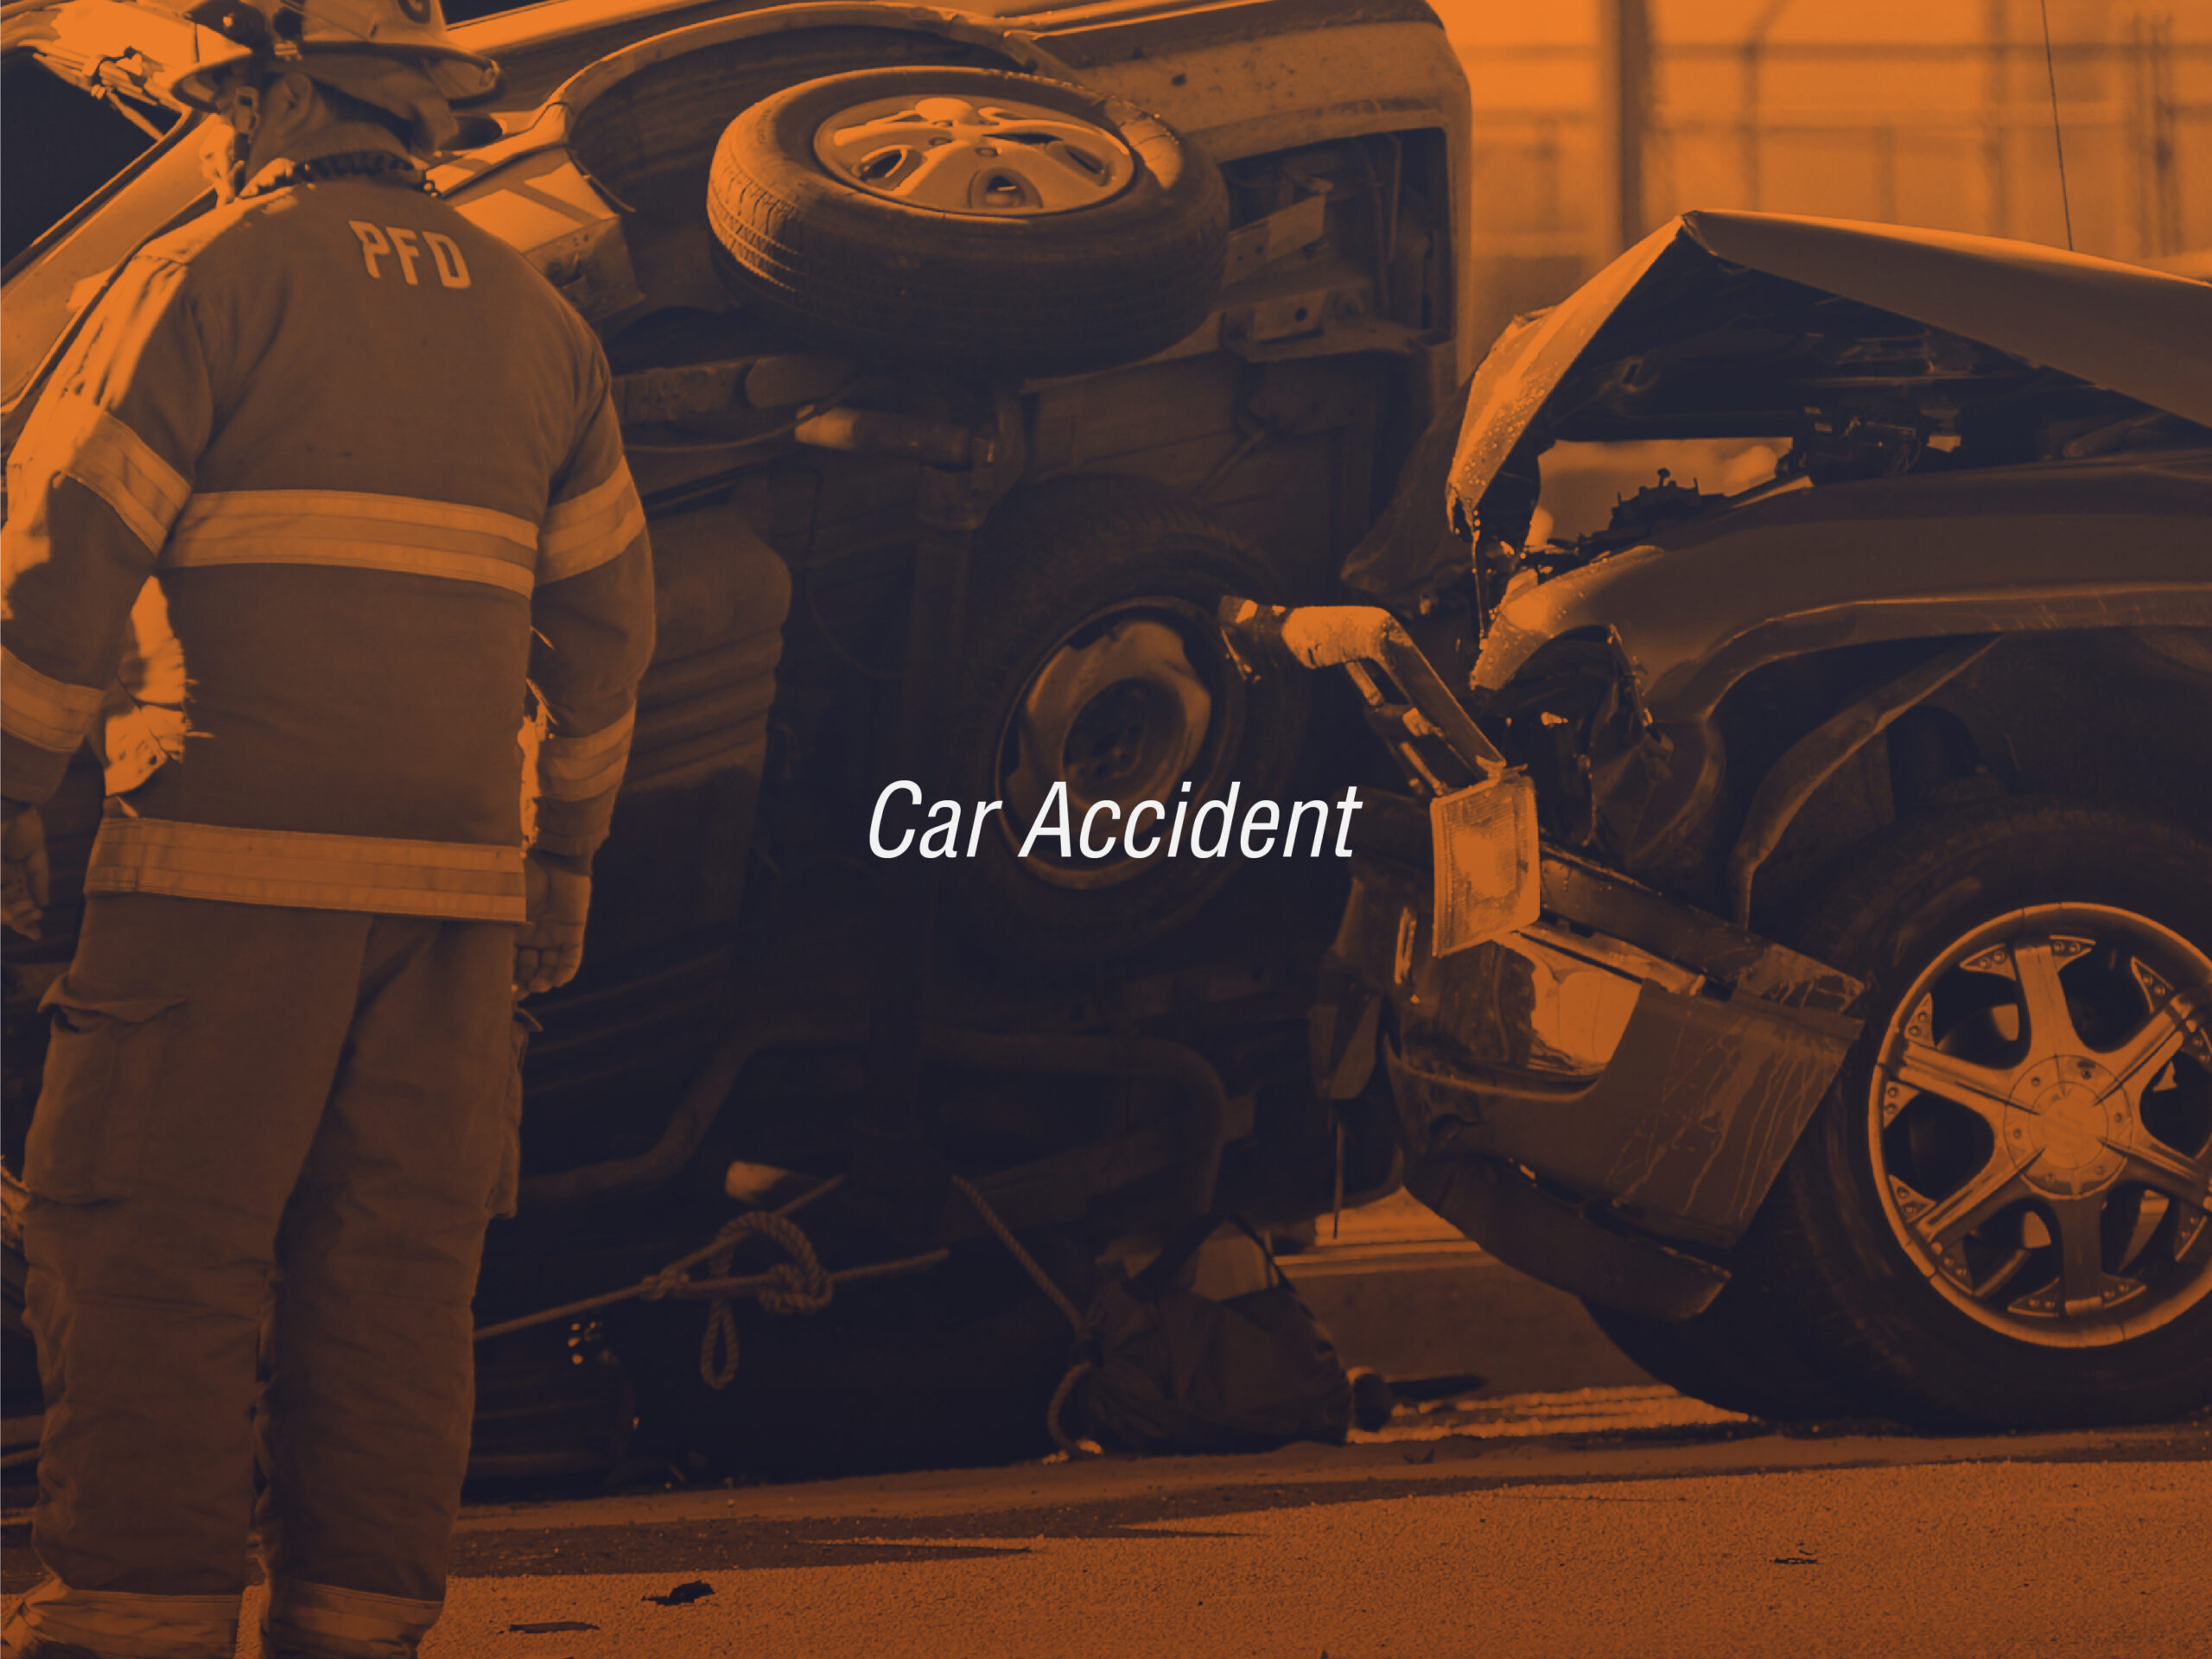 How to handle a California car accident claim